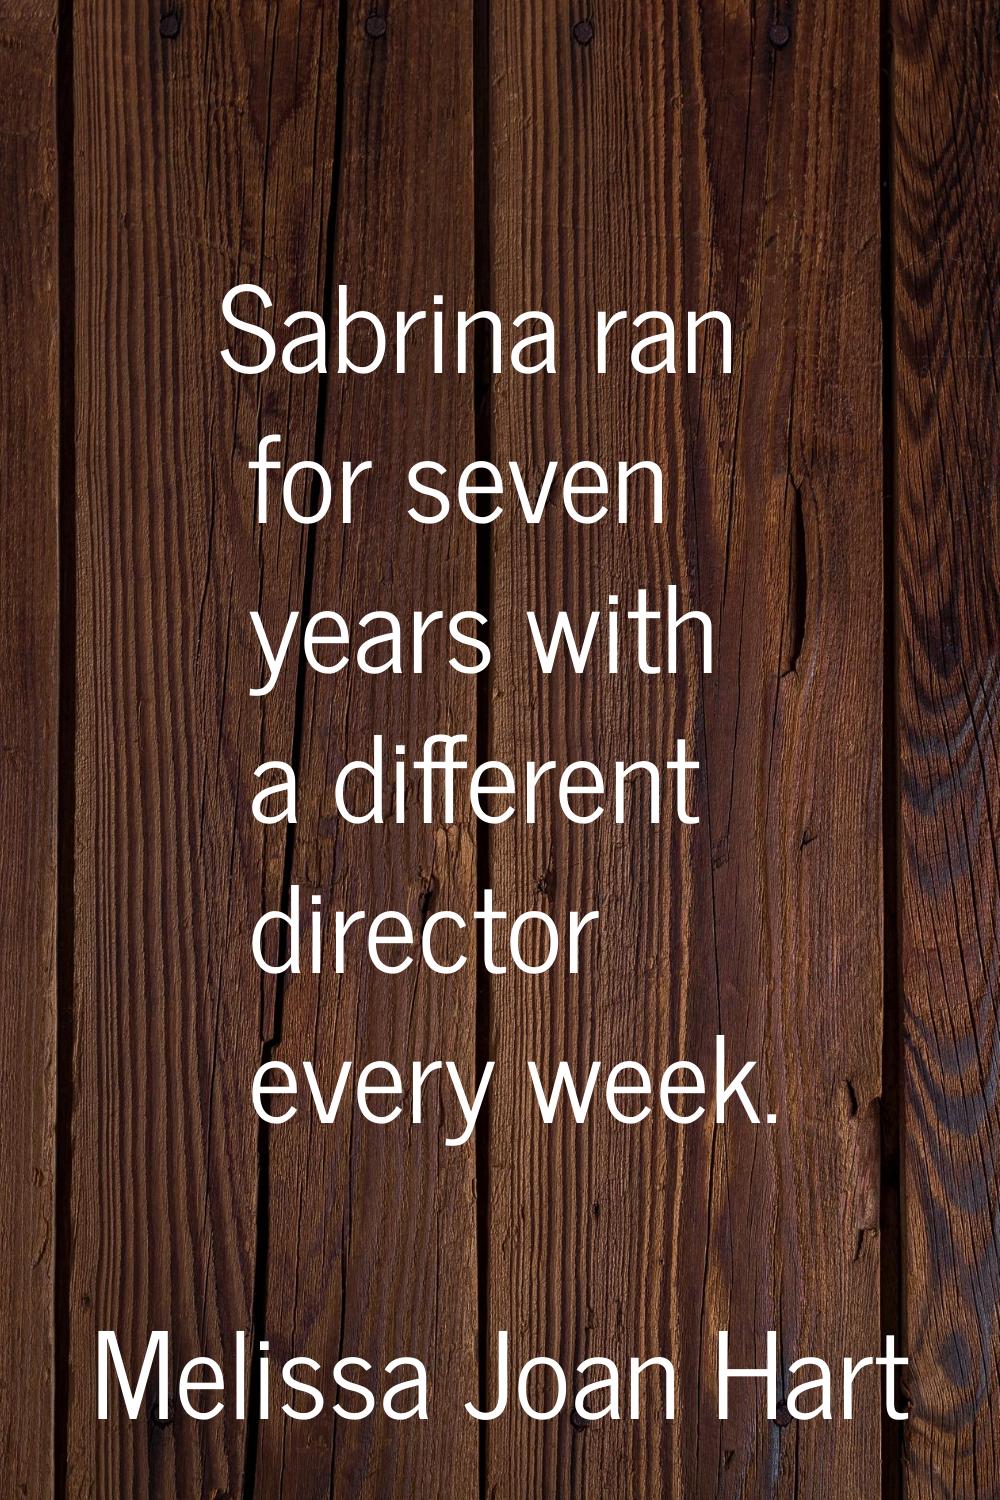 Sabrina ran for seven years with a different director every week.